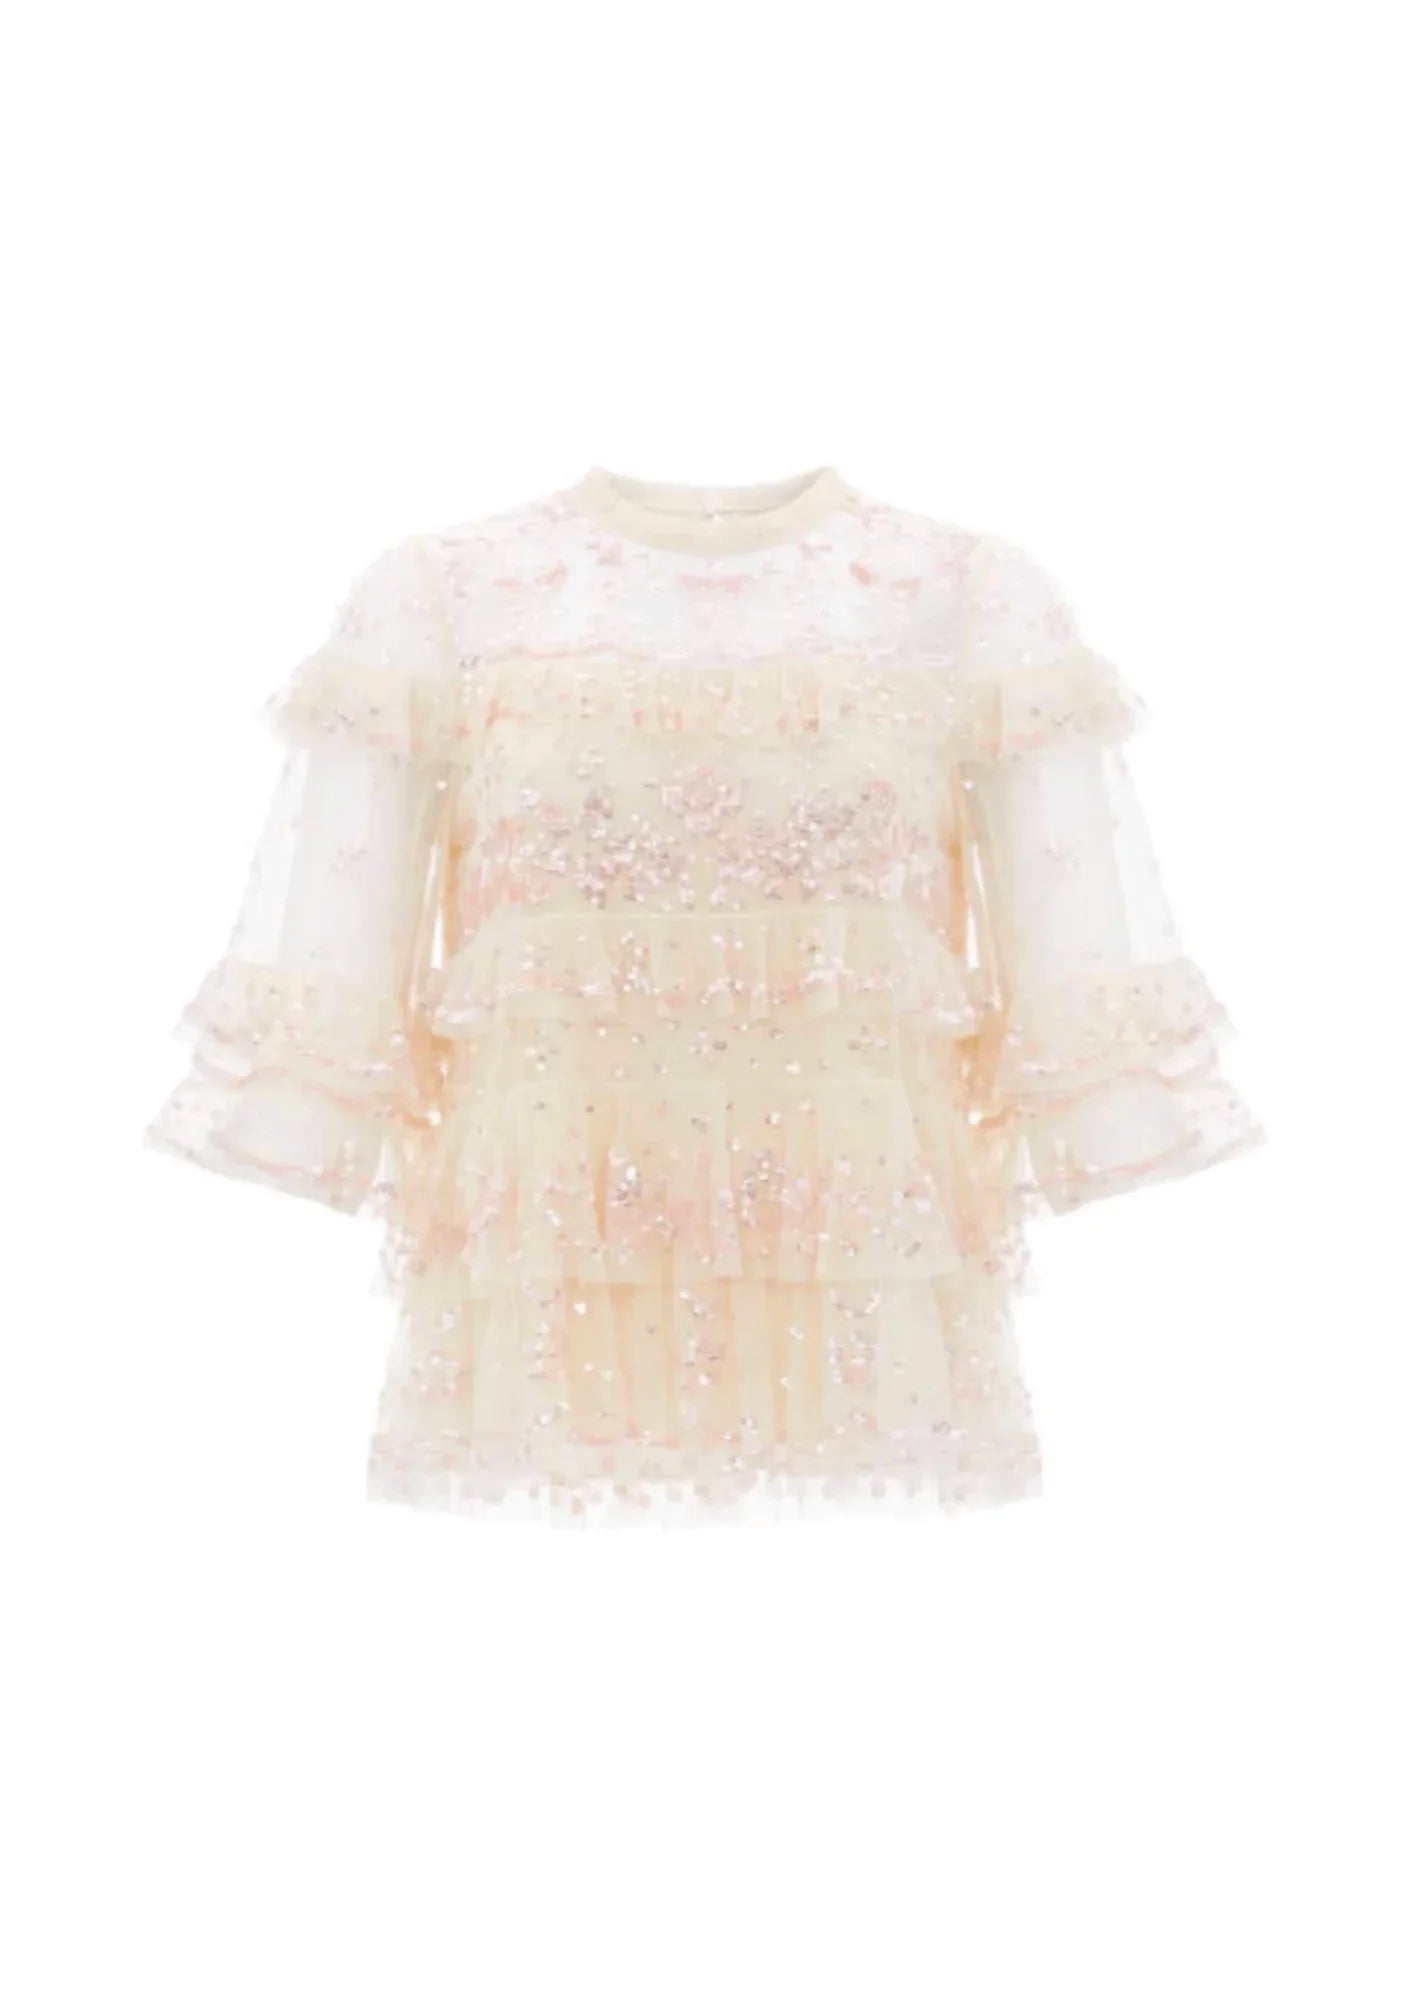 YELLOW TULLE AND SEQUINS TOP ELOISE